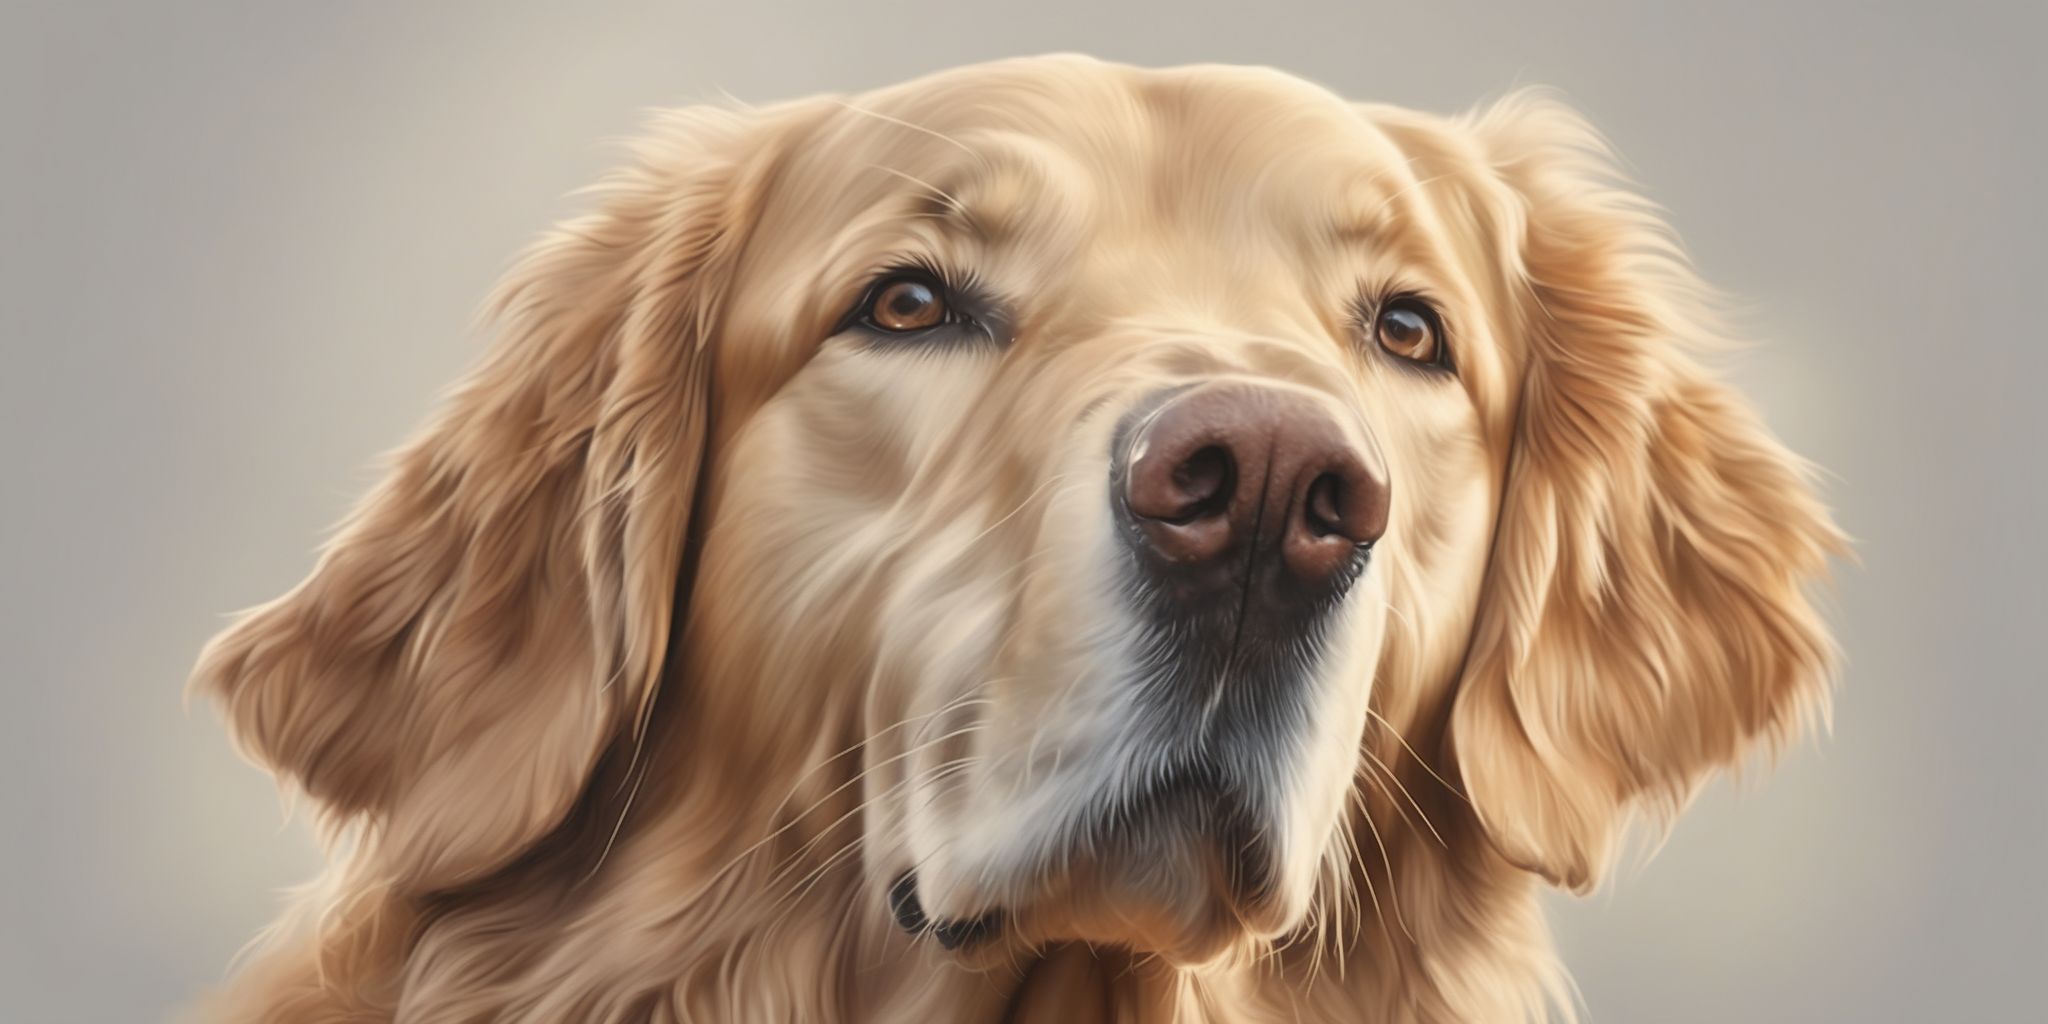 Golden retriever  in realistic, photographic style